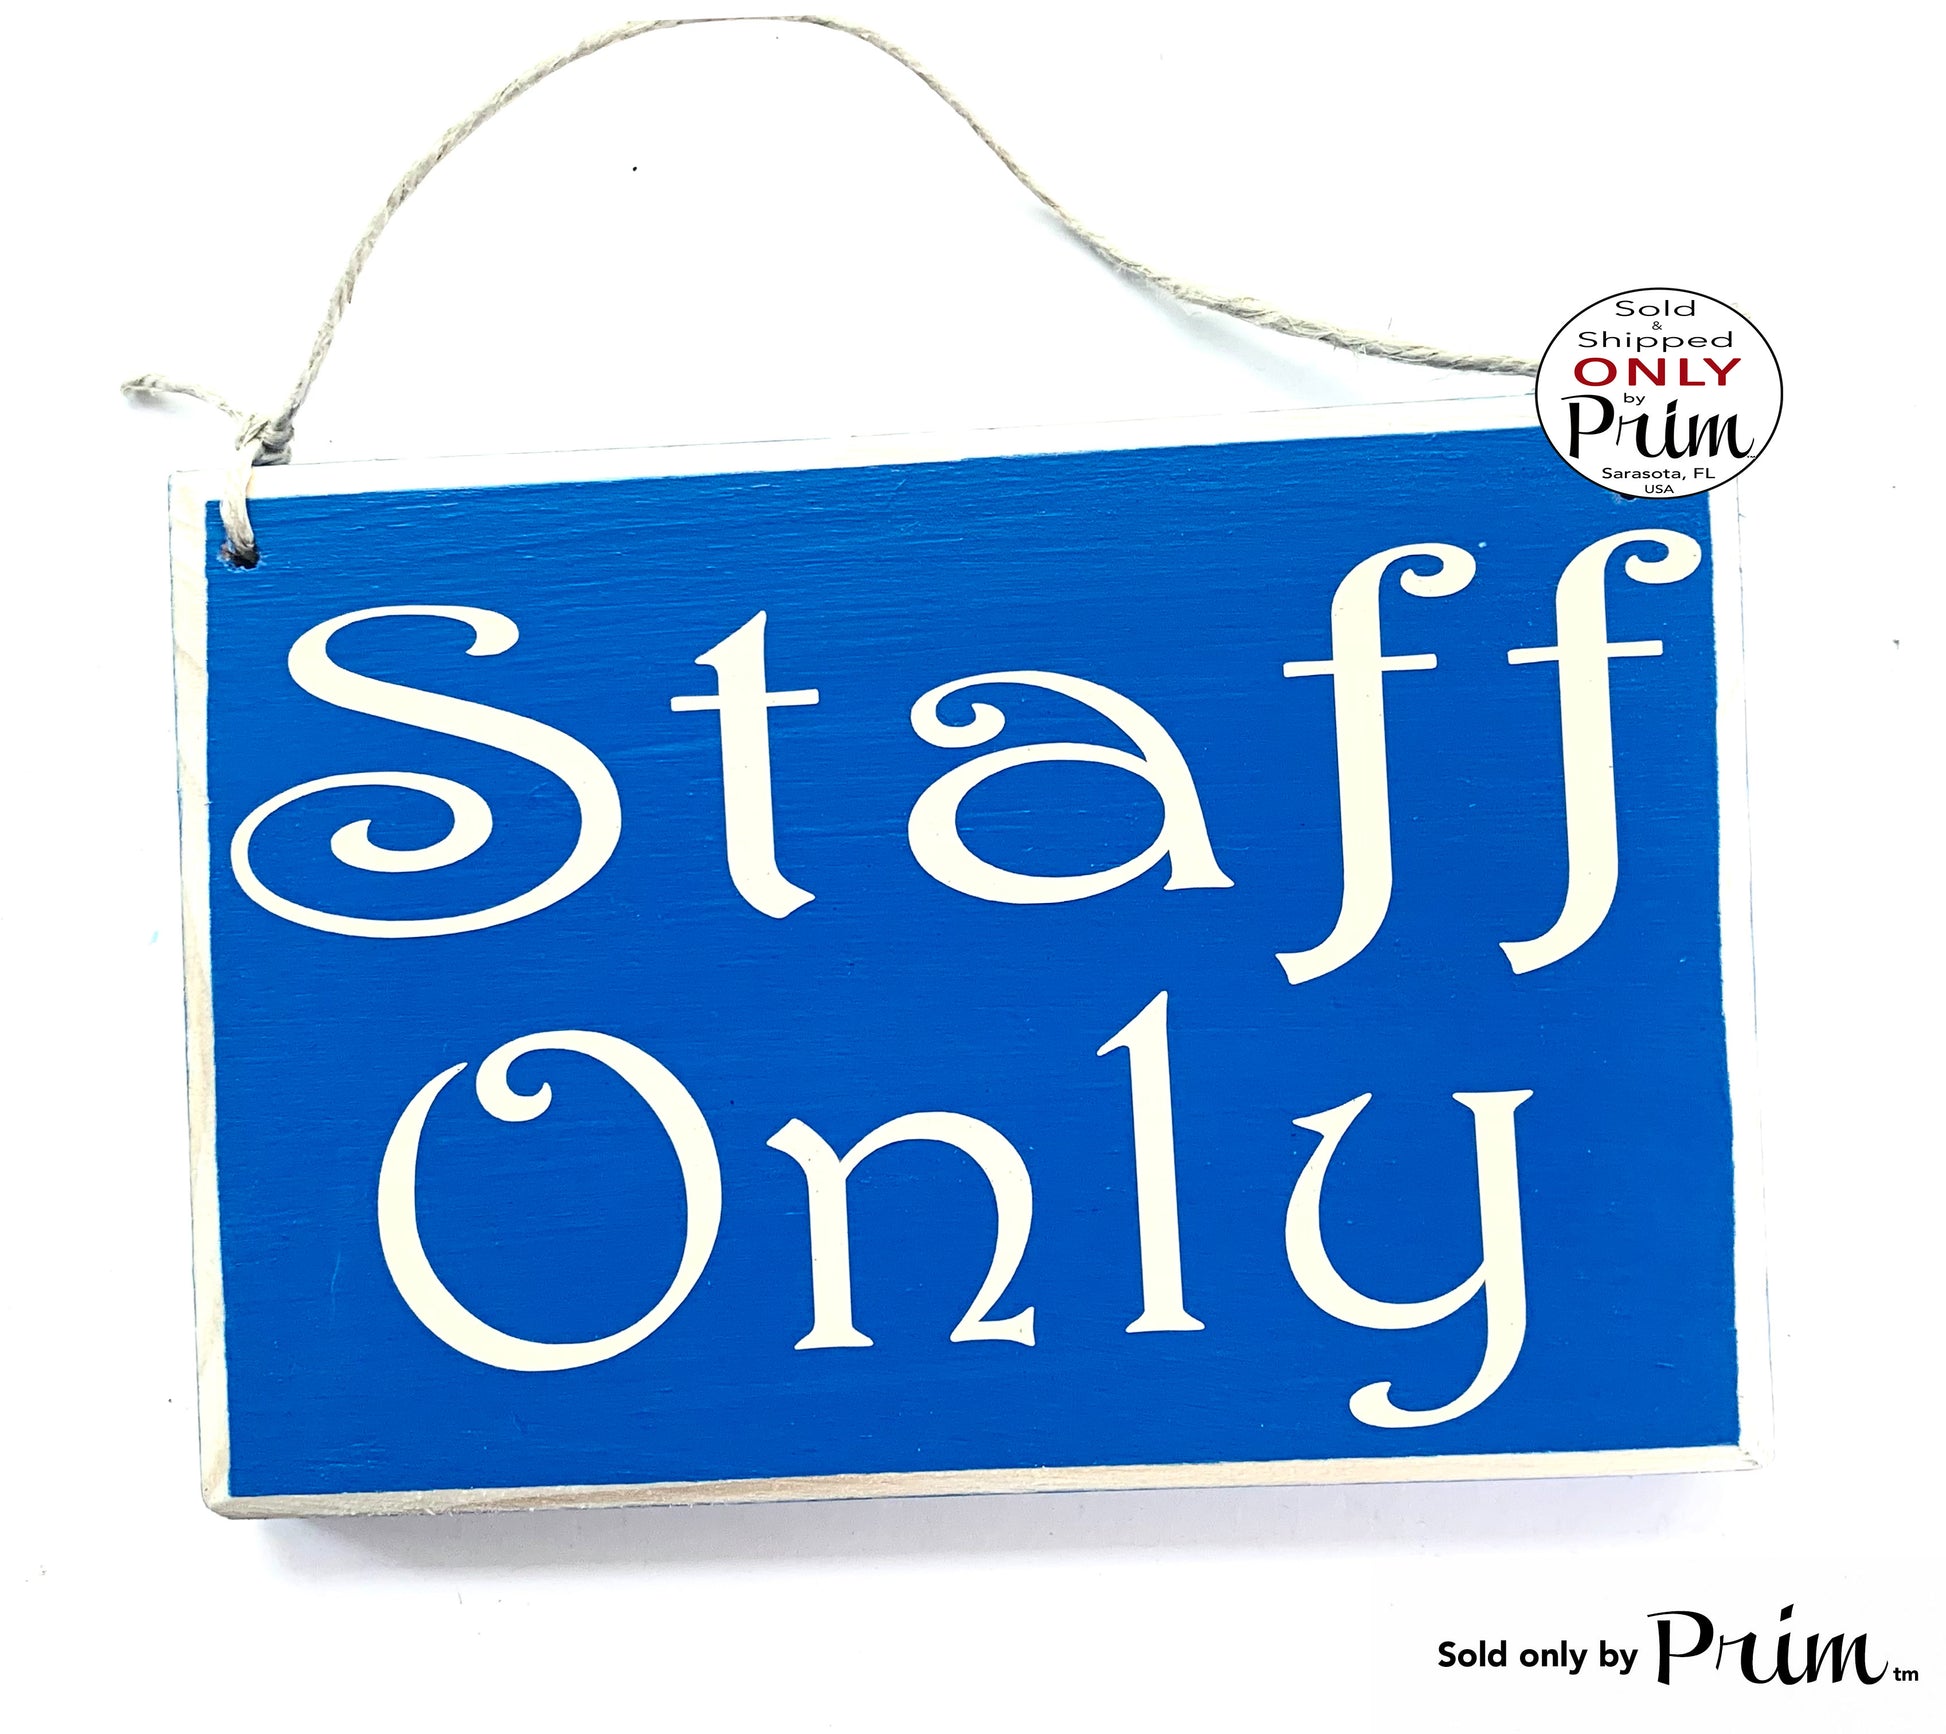 Designs by Prim 8x6 Staff Only Custom Wood Sign Employees Please Do Not Enter Office Private No Entry Business Store Shop Salon Spa Wall Decor Door Plaque